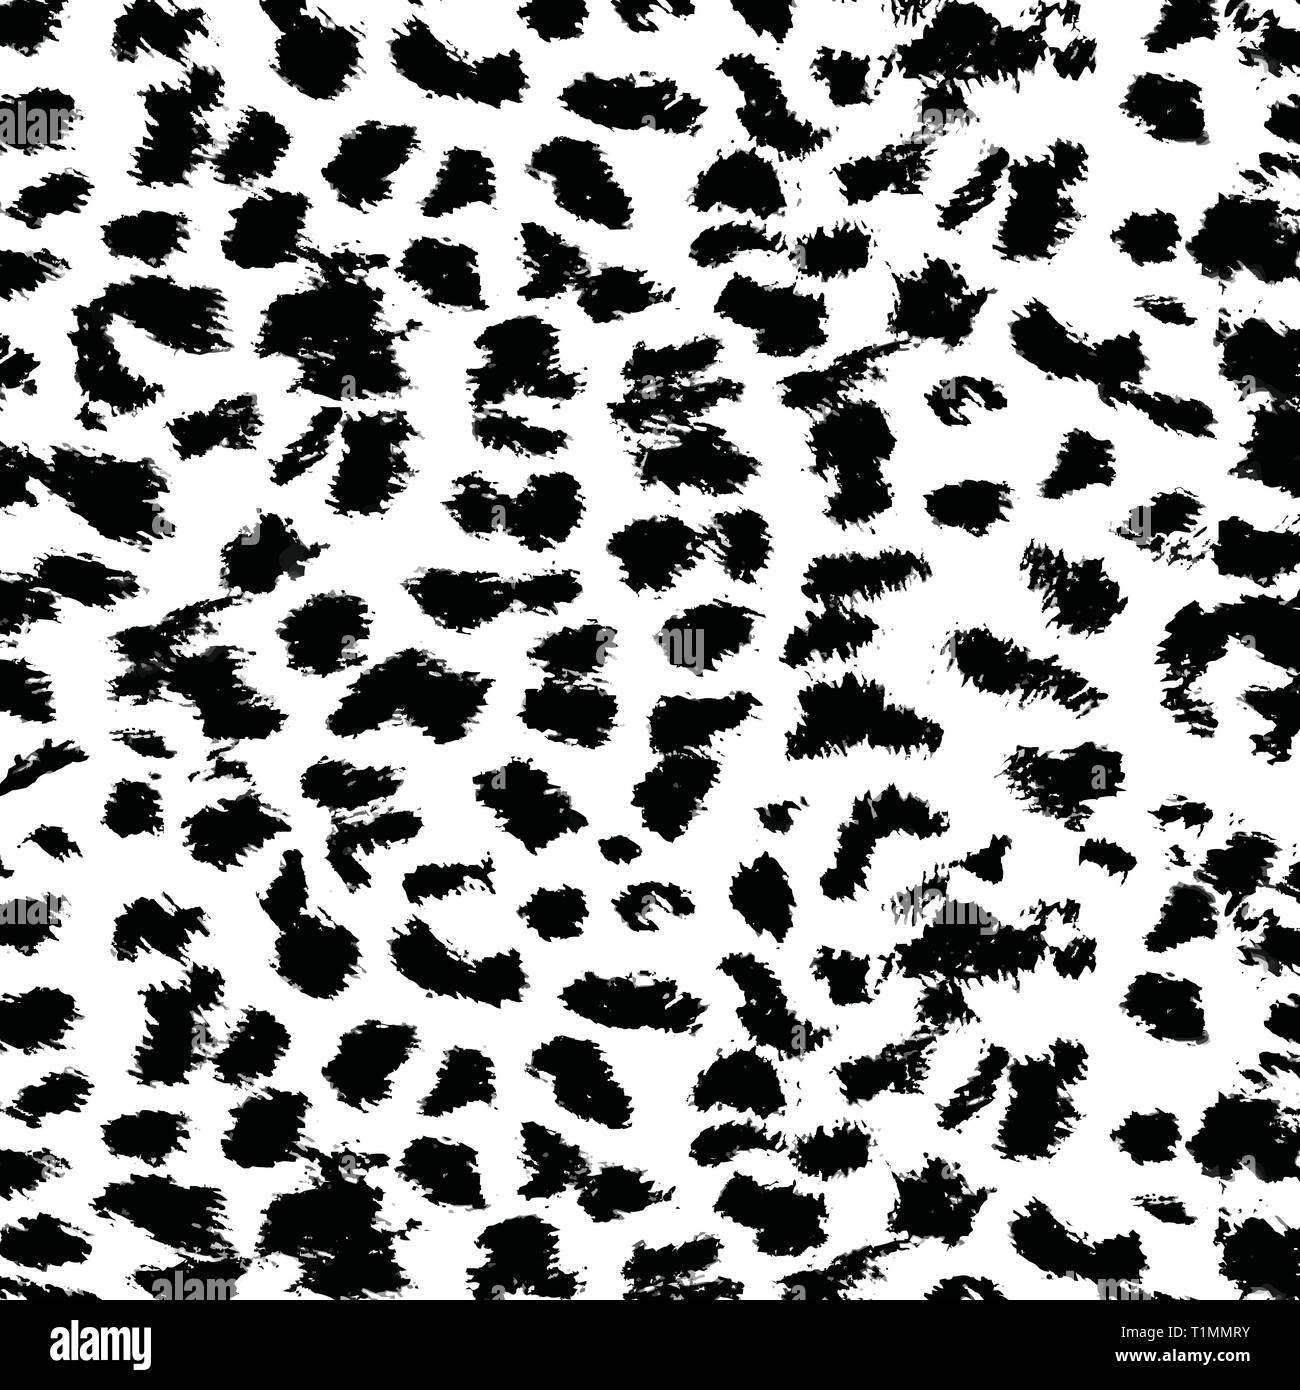 Leopard Print Repeat Vector Images (over 10,000)